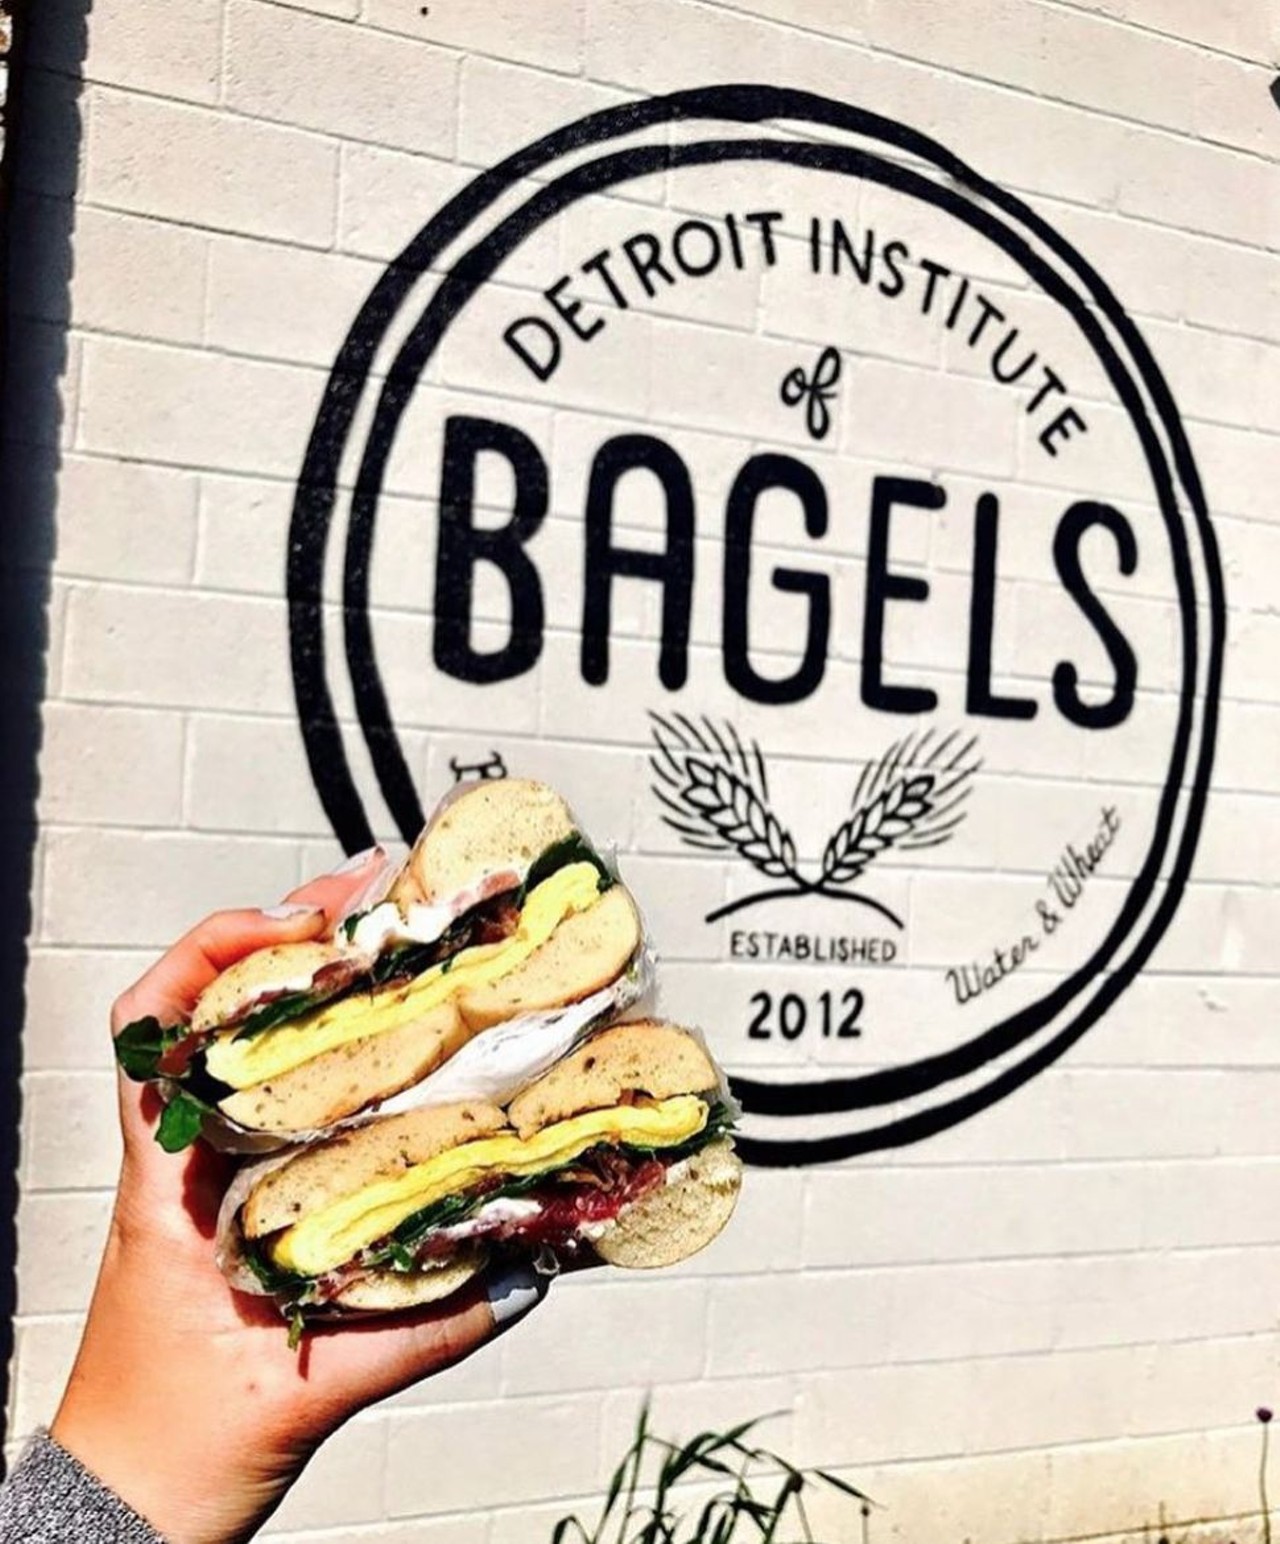 Detroit Institute of Bagels 
1236 Michigan Ave., Detroit; 313-444-9342
Head baker Ben Newman makes up to 600 bagels fresh daily &#151; many of them are made into delicious breakfast sandwiches or smothered in sumptious schmear &#151; there&#146;s even a bagel dog option. 
Photo via Instagram, Detroit Institute of Bagels.